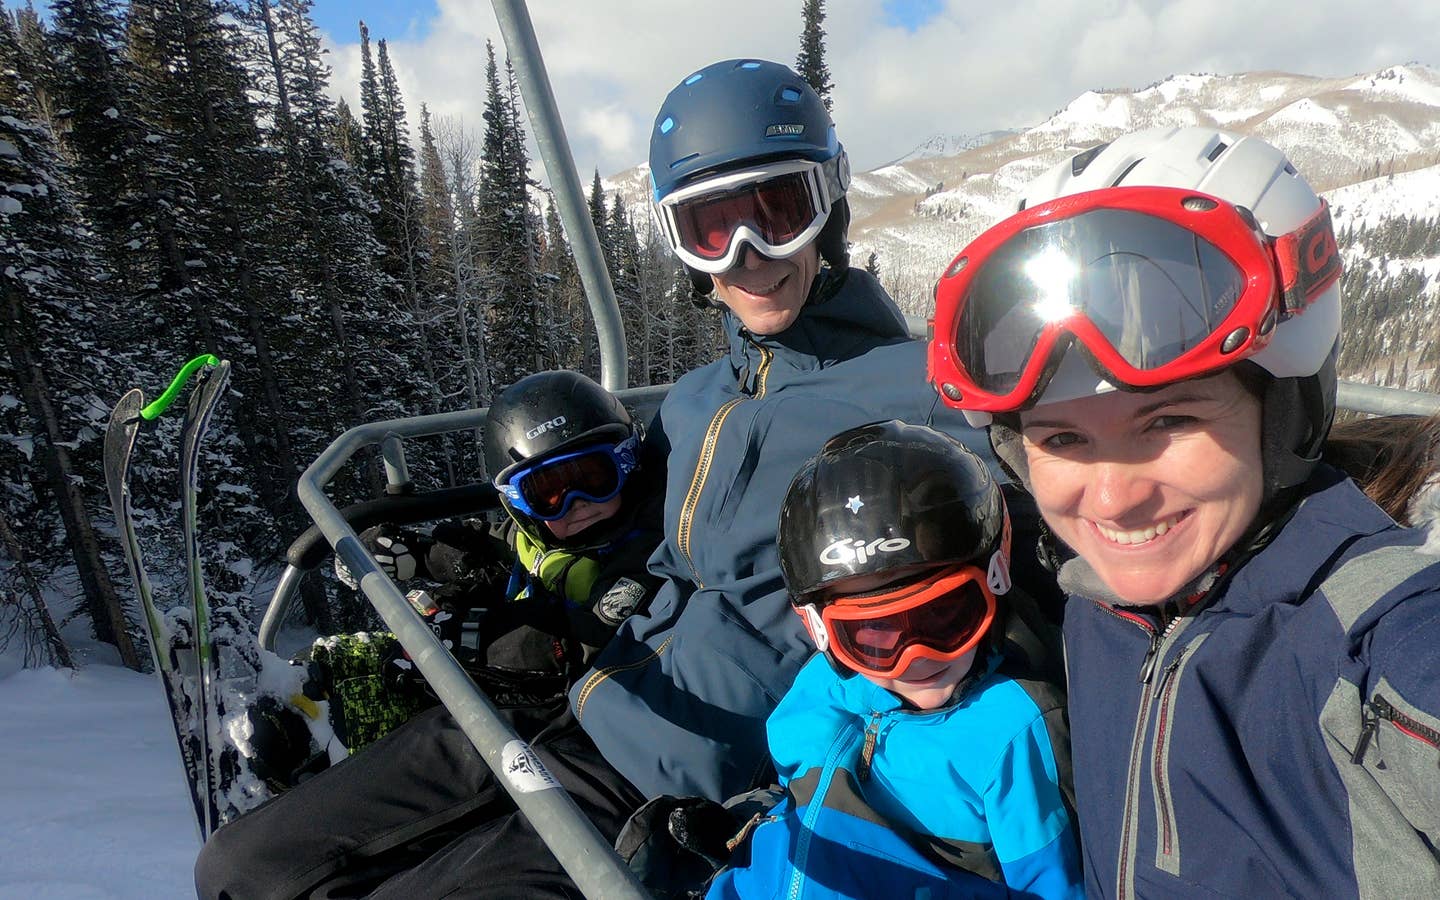 Author, Jessica Averett, and her family sit on the ski lift in winter apparel and ski gear.